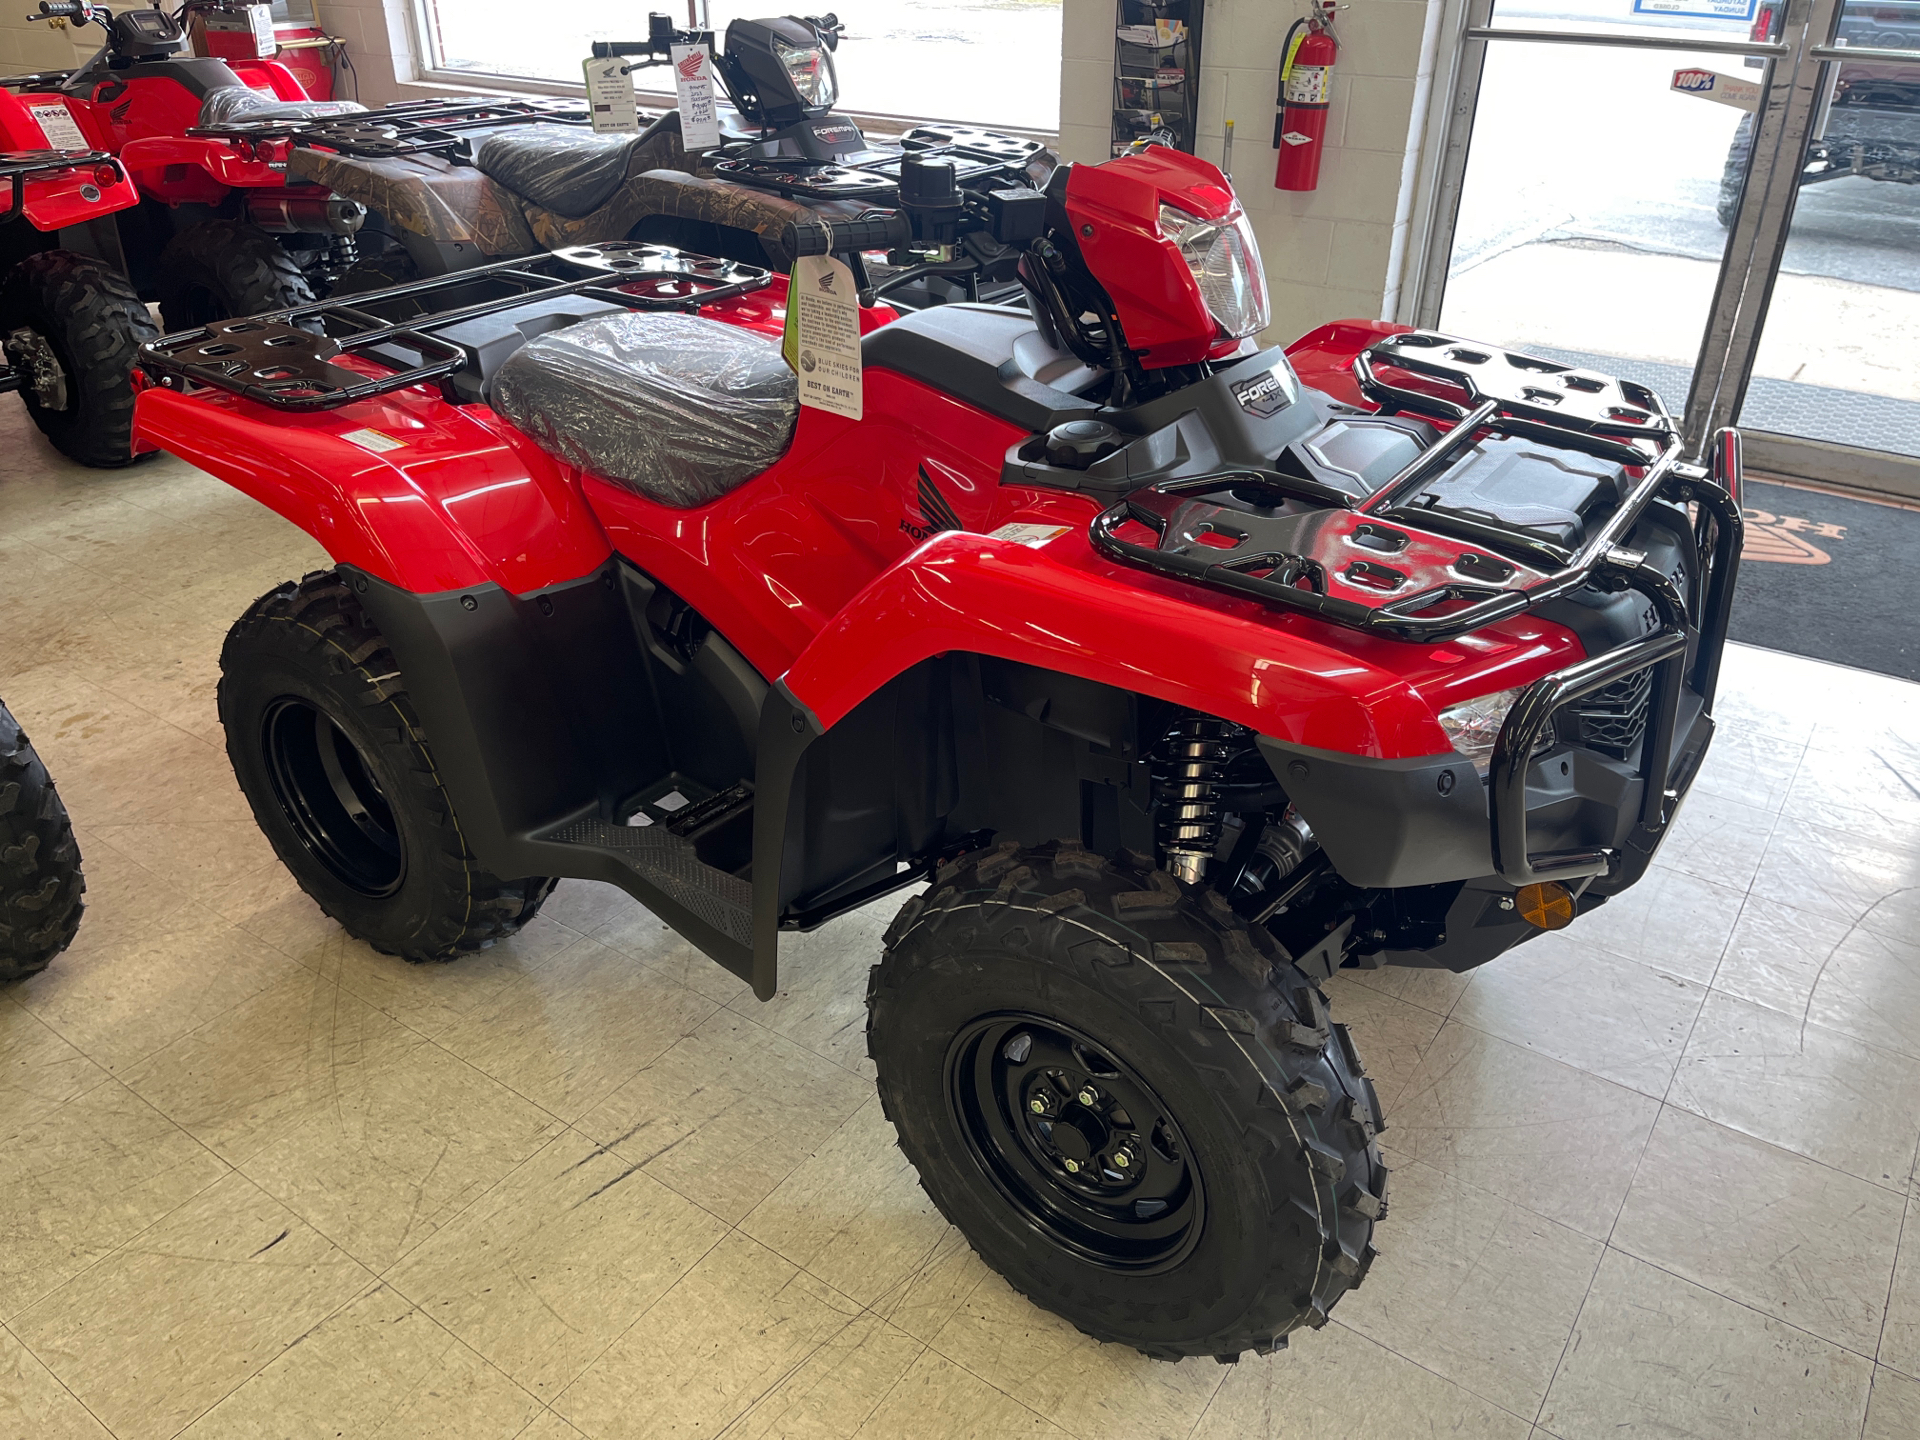 2023 Honda FourTrax Foreman 4x4 in Greeneville, Tennessee - Photo 3